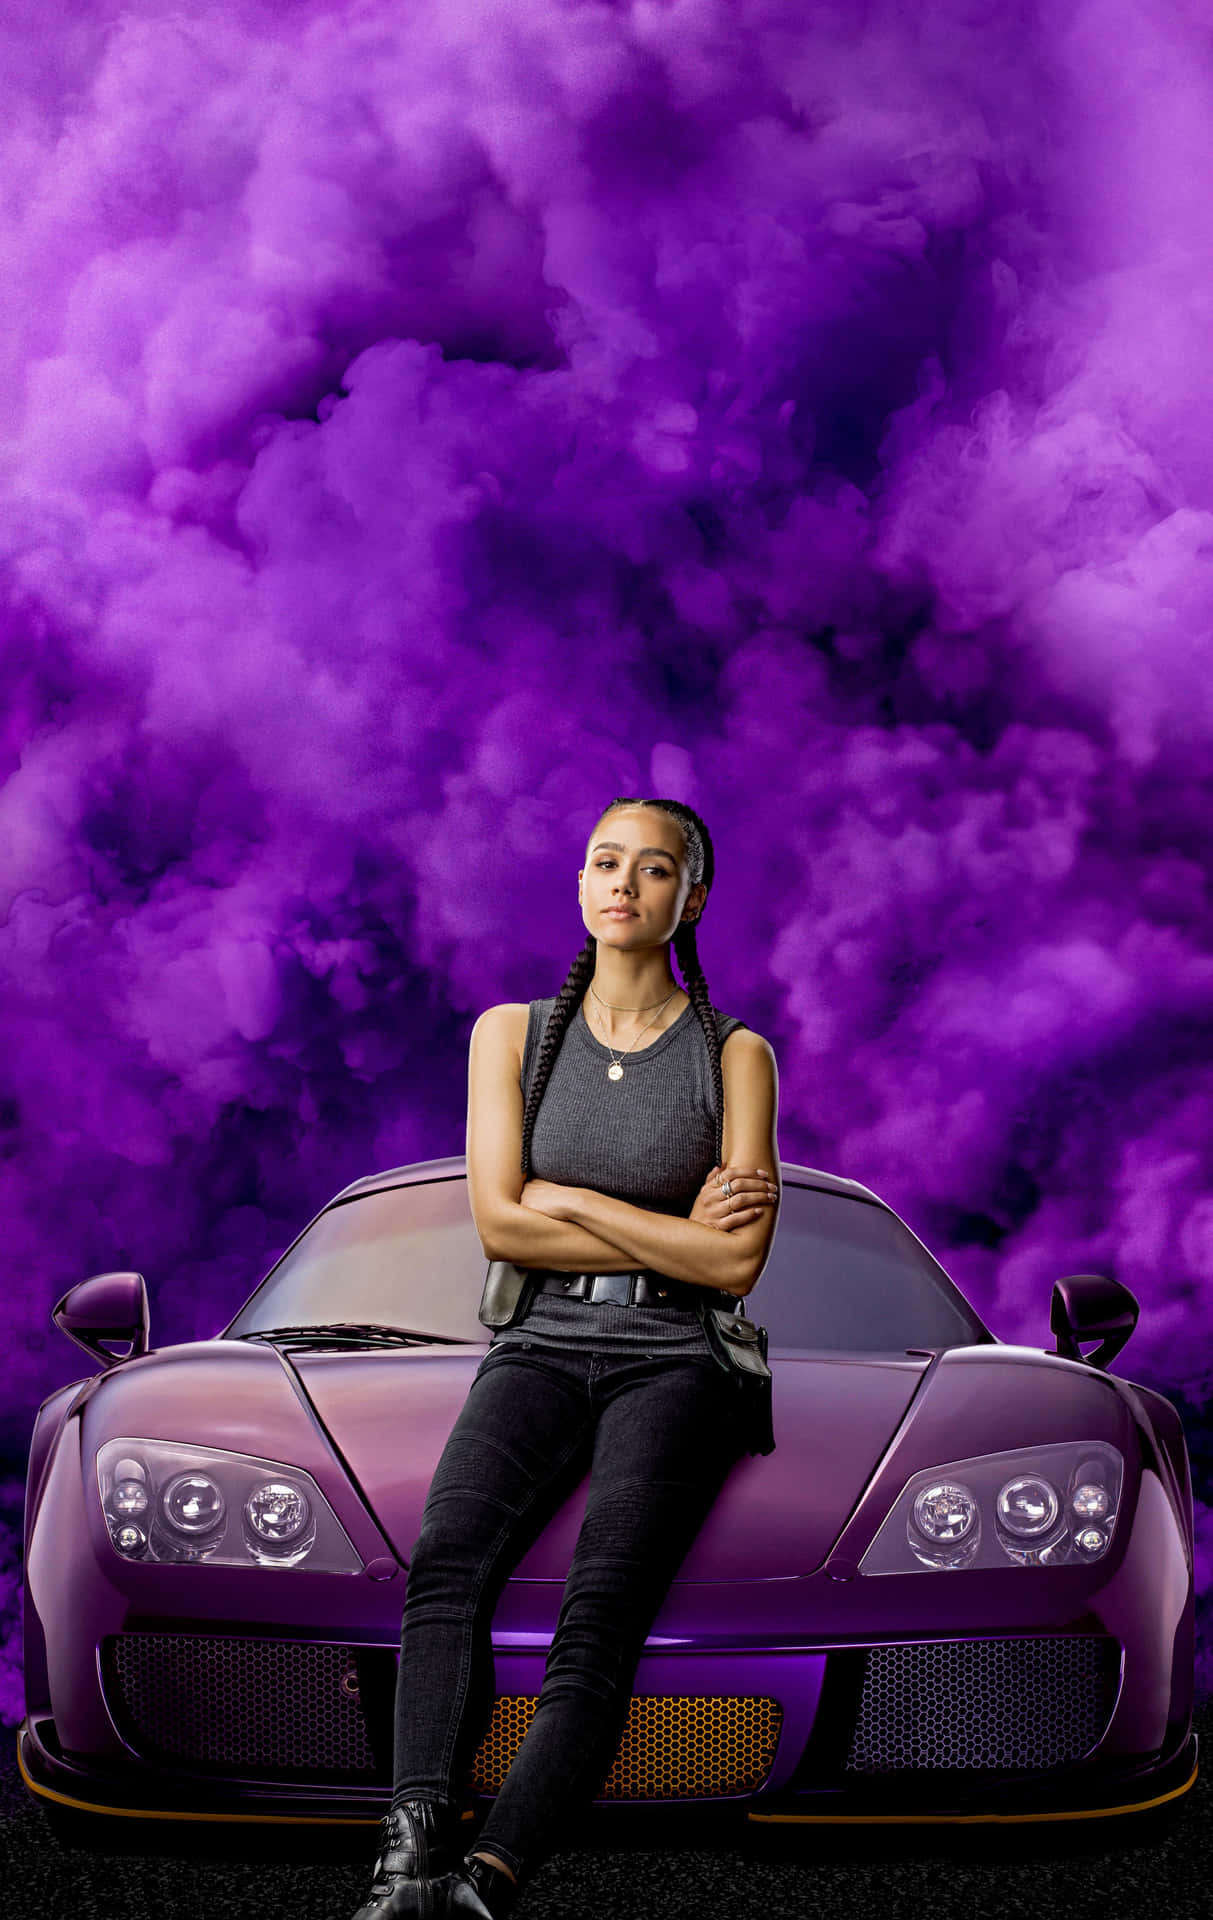 A Woman Sitting On Top Of A Purple Sports Car Wallpaper